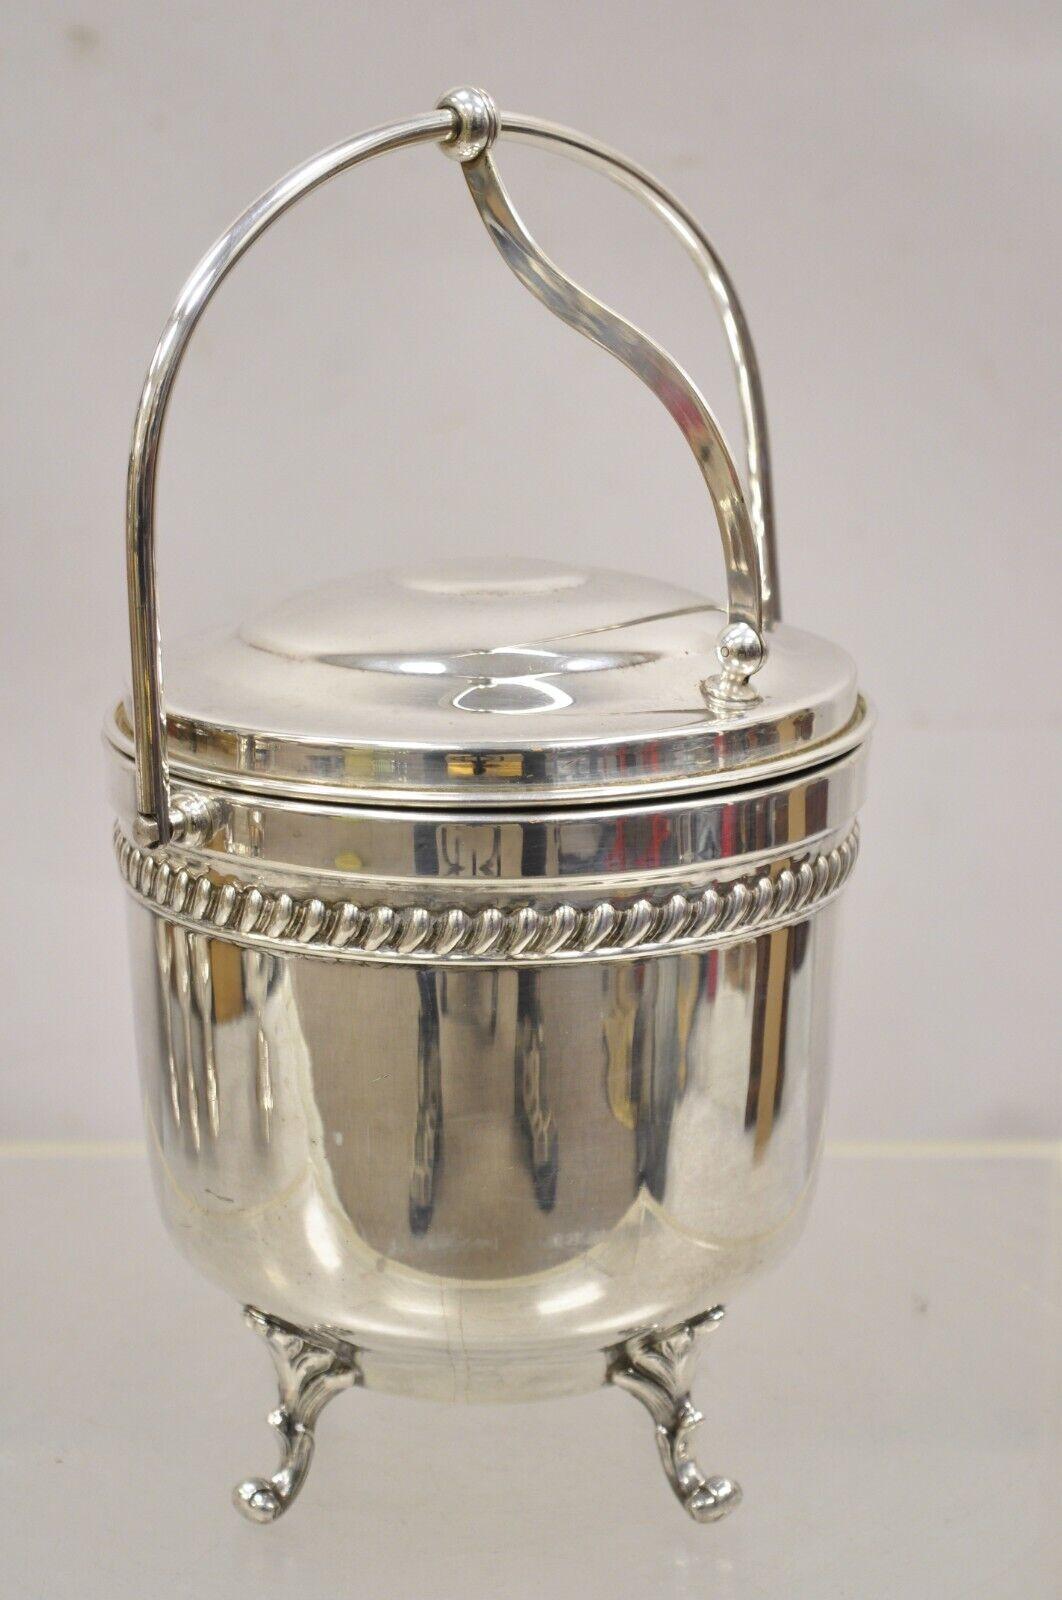 Vintage English Sheffield Silver Plated Reticulated Hinged Handle Lidded Ice Bucket with Glass Liner. Circa Mid to Late 20th Century
Measurements:  13